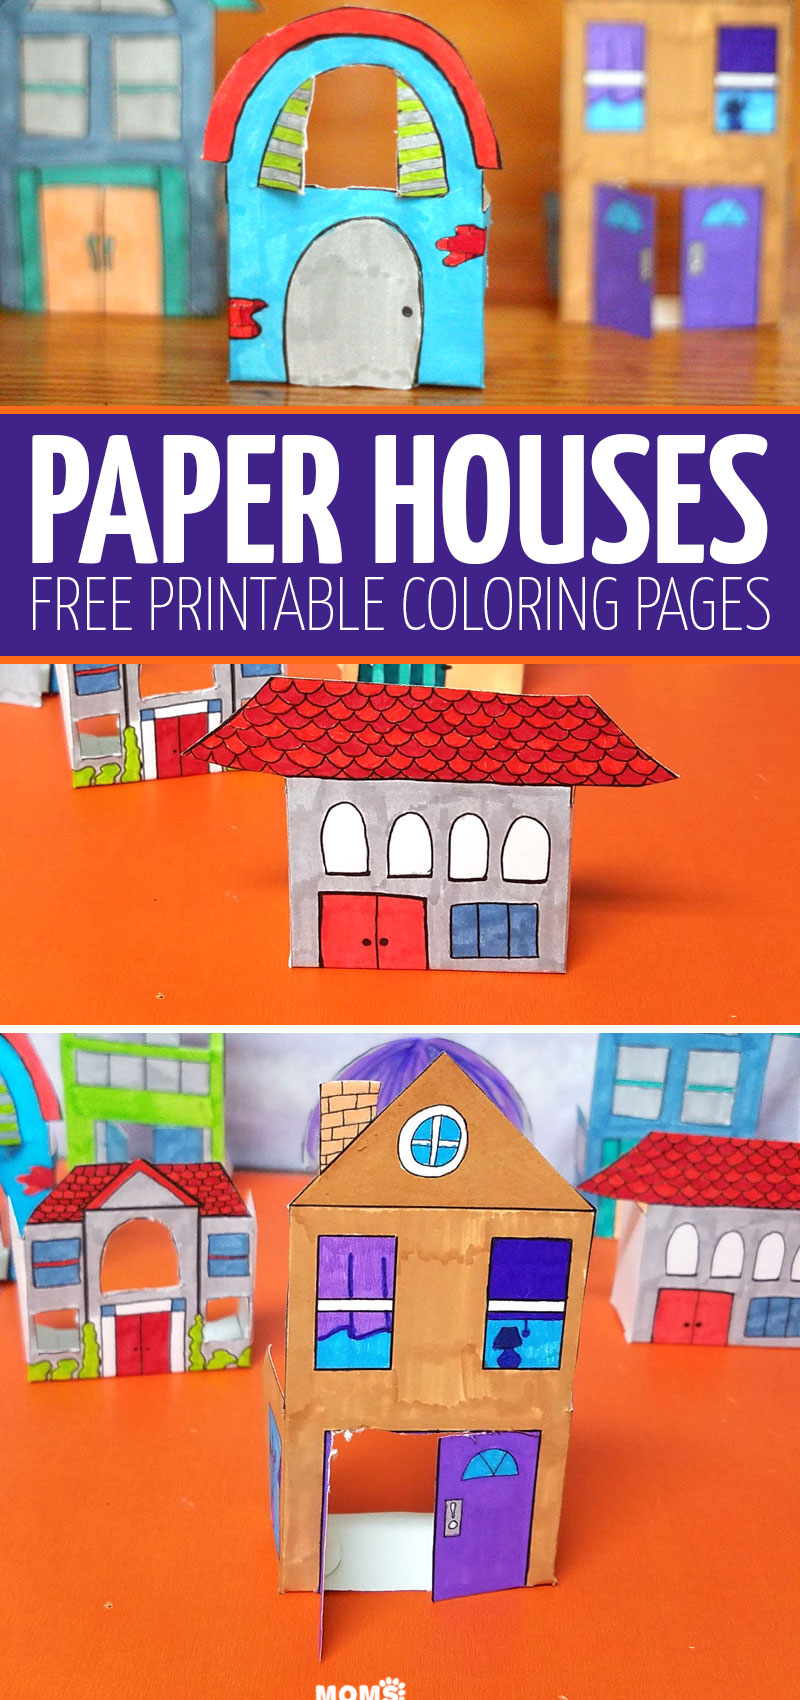 Foolproof free printable paper houses for kids and grown